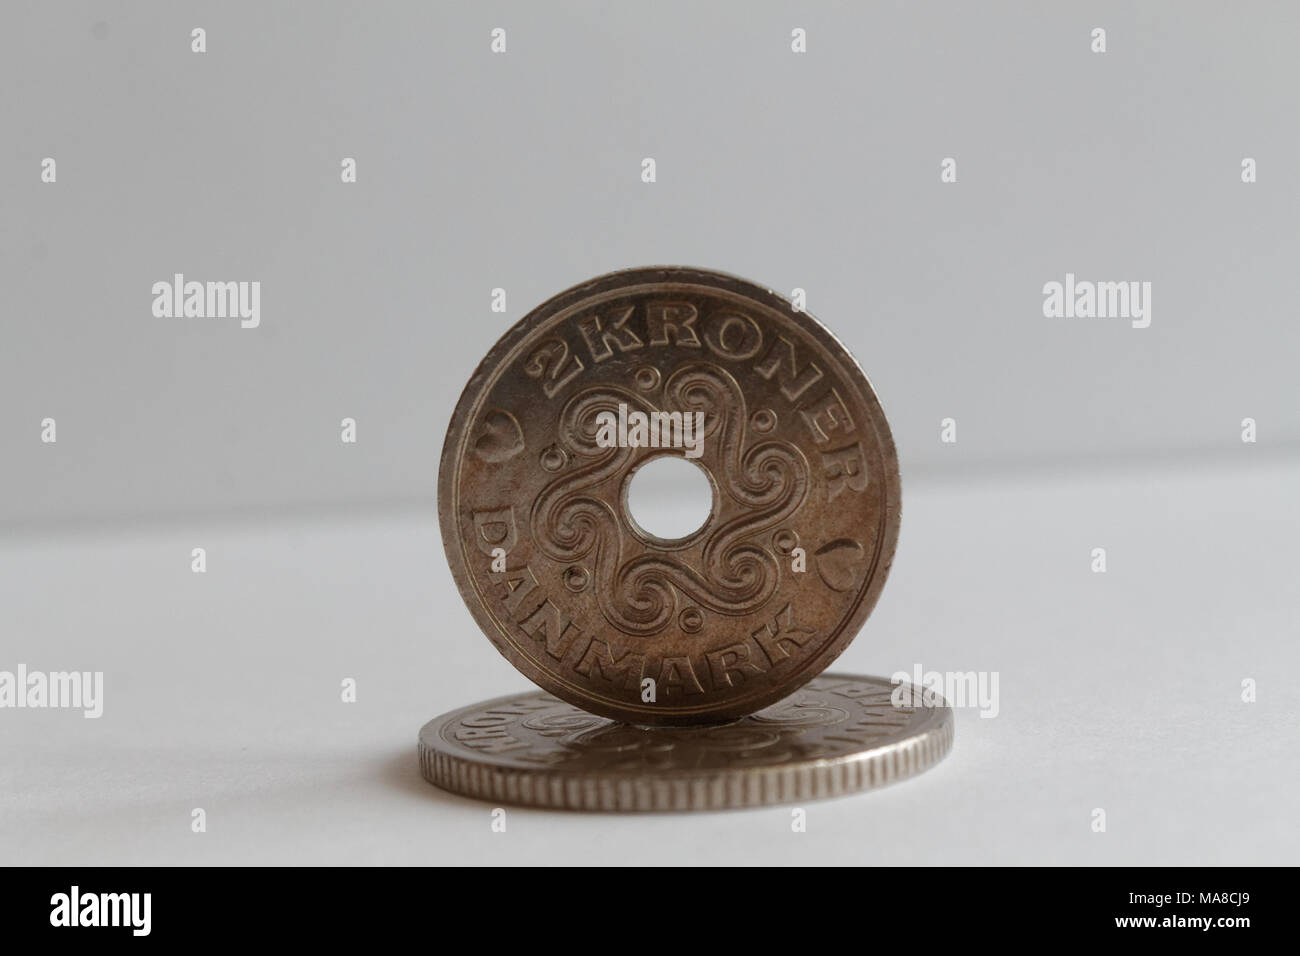 Two Denmark coins lie on isolated white background Denomination is two krone (crown) Stock Photo